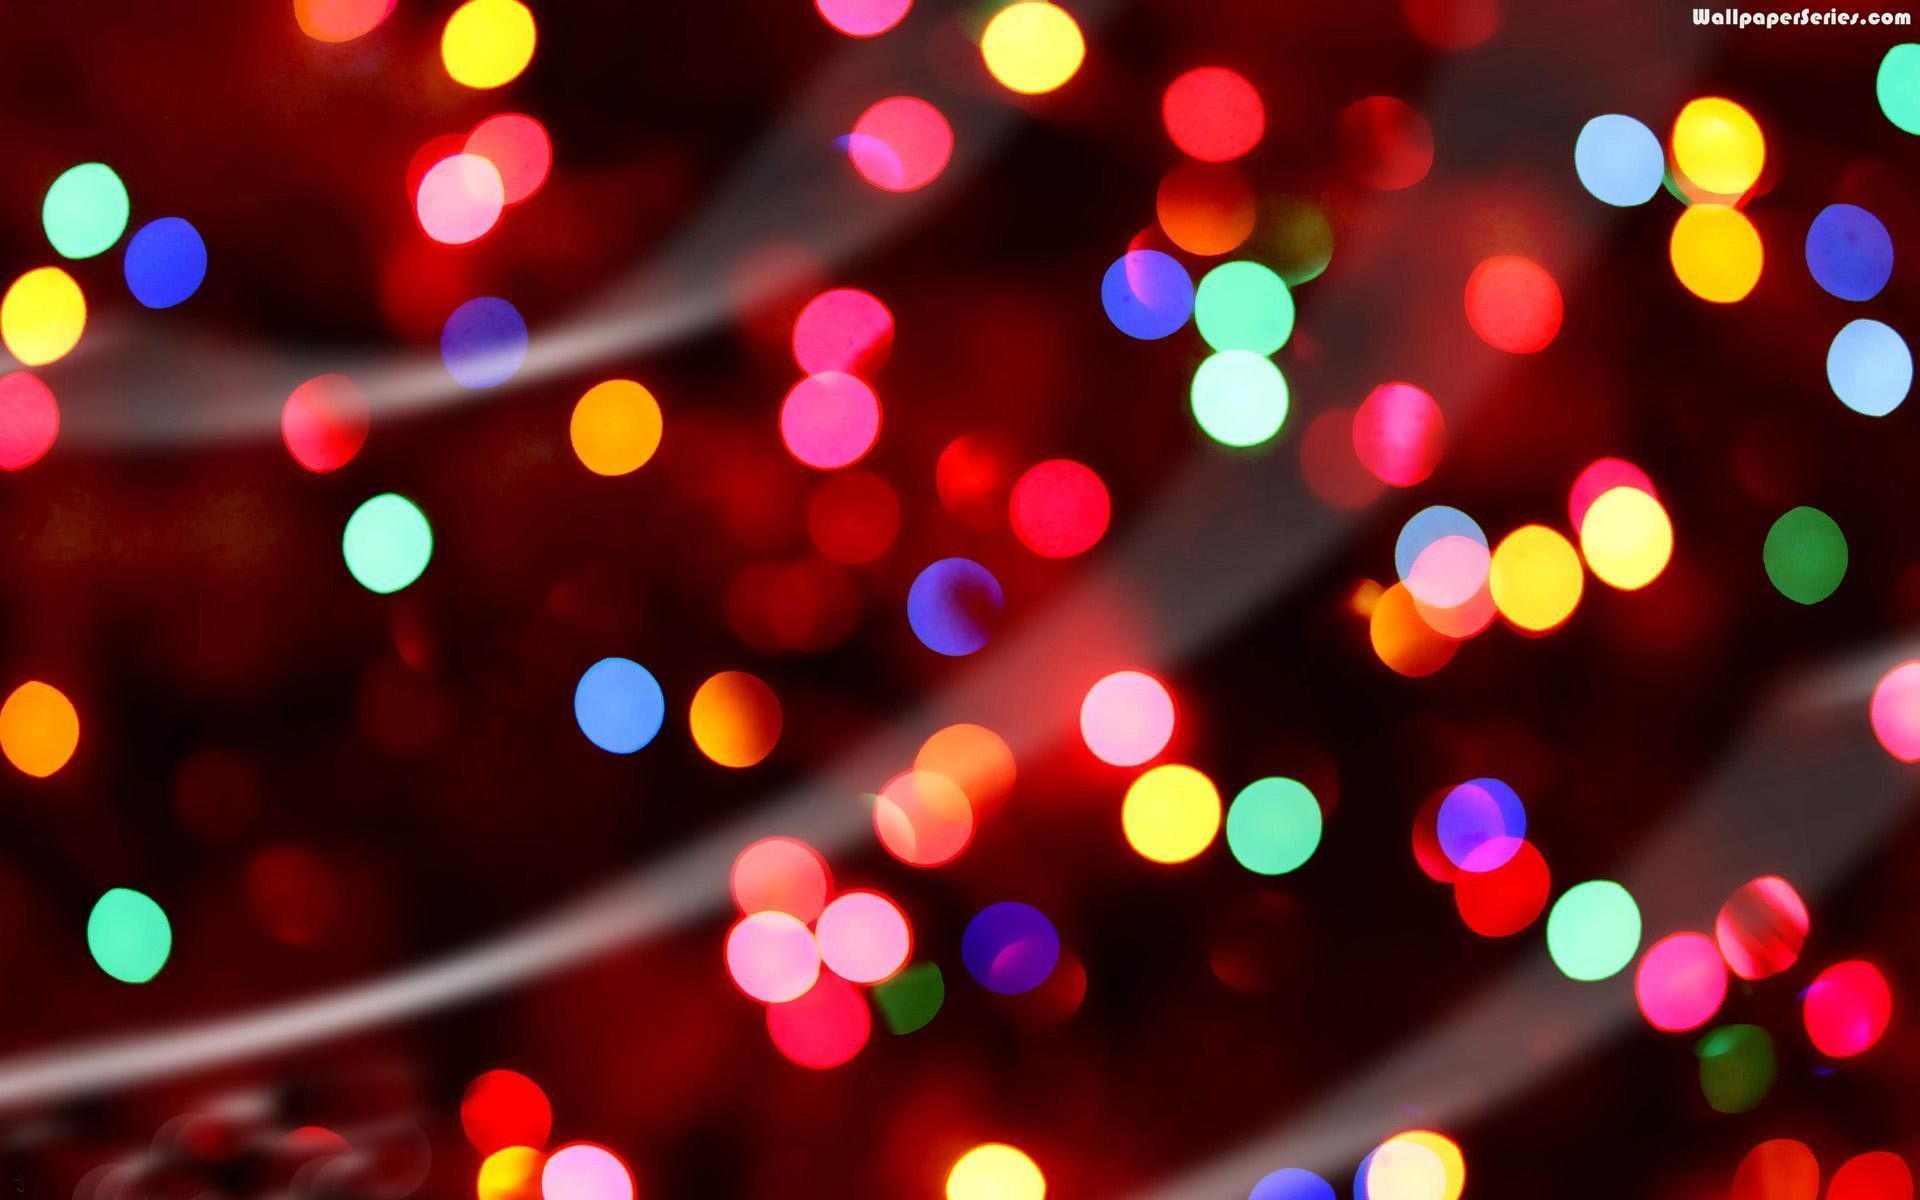 Top 10 christmas lights wallpapers and backgrounds for Desktop